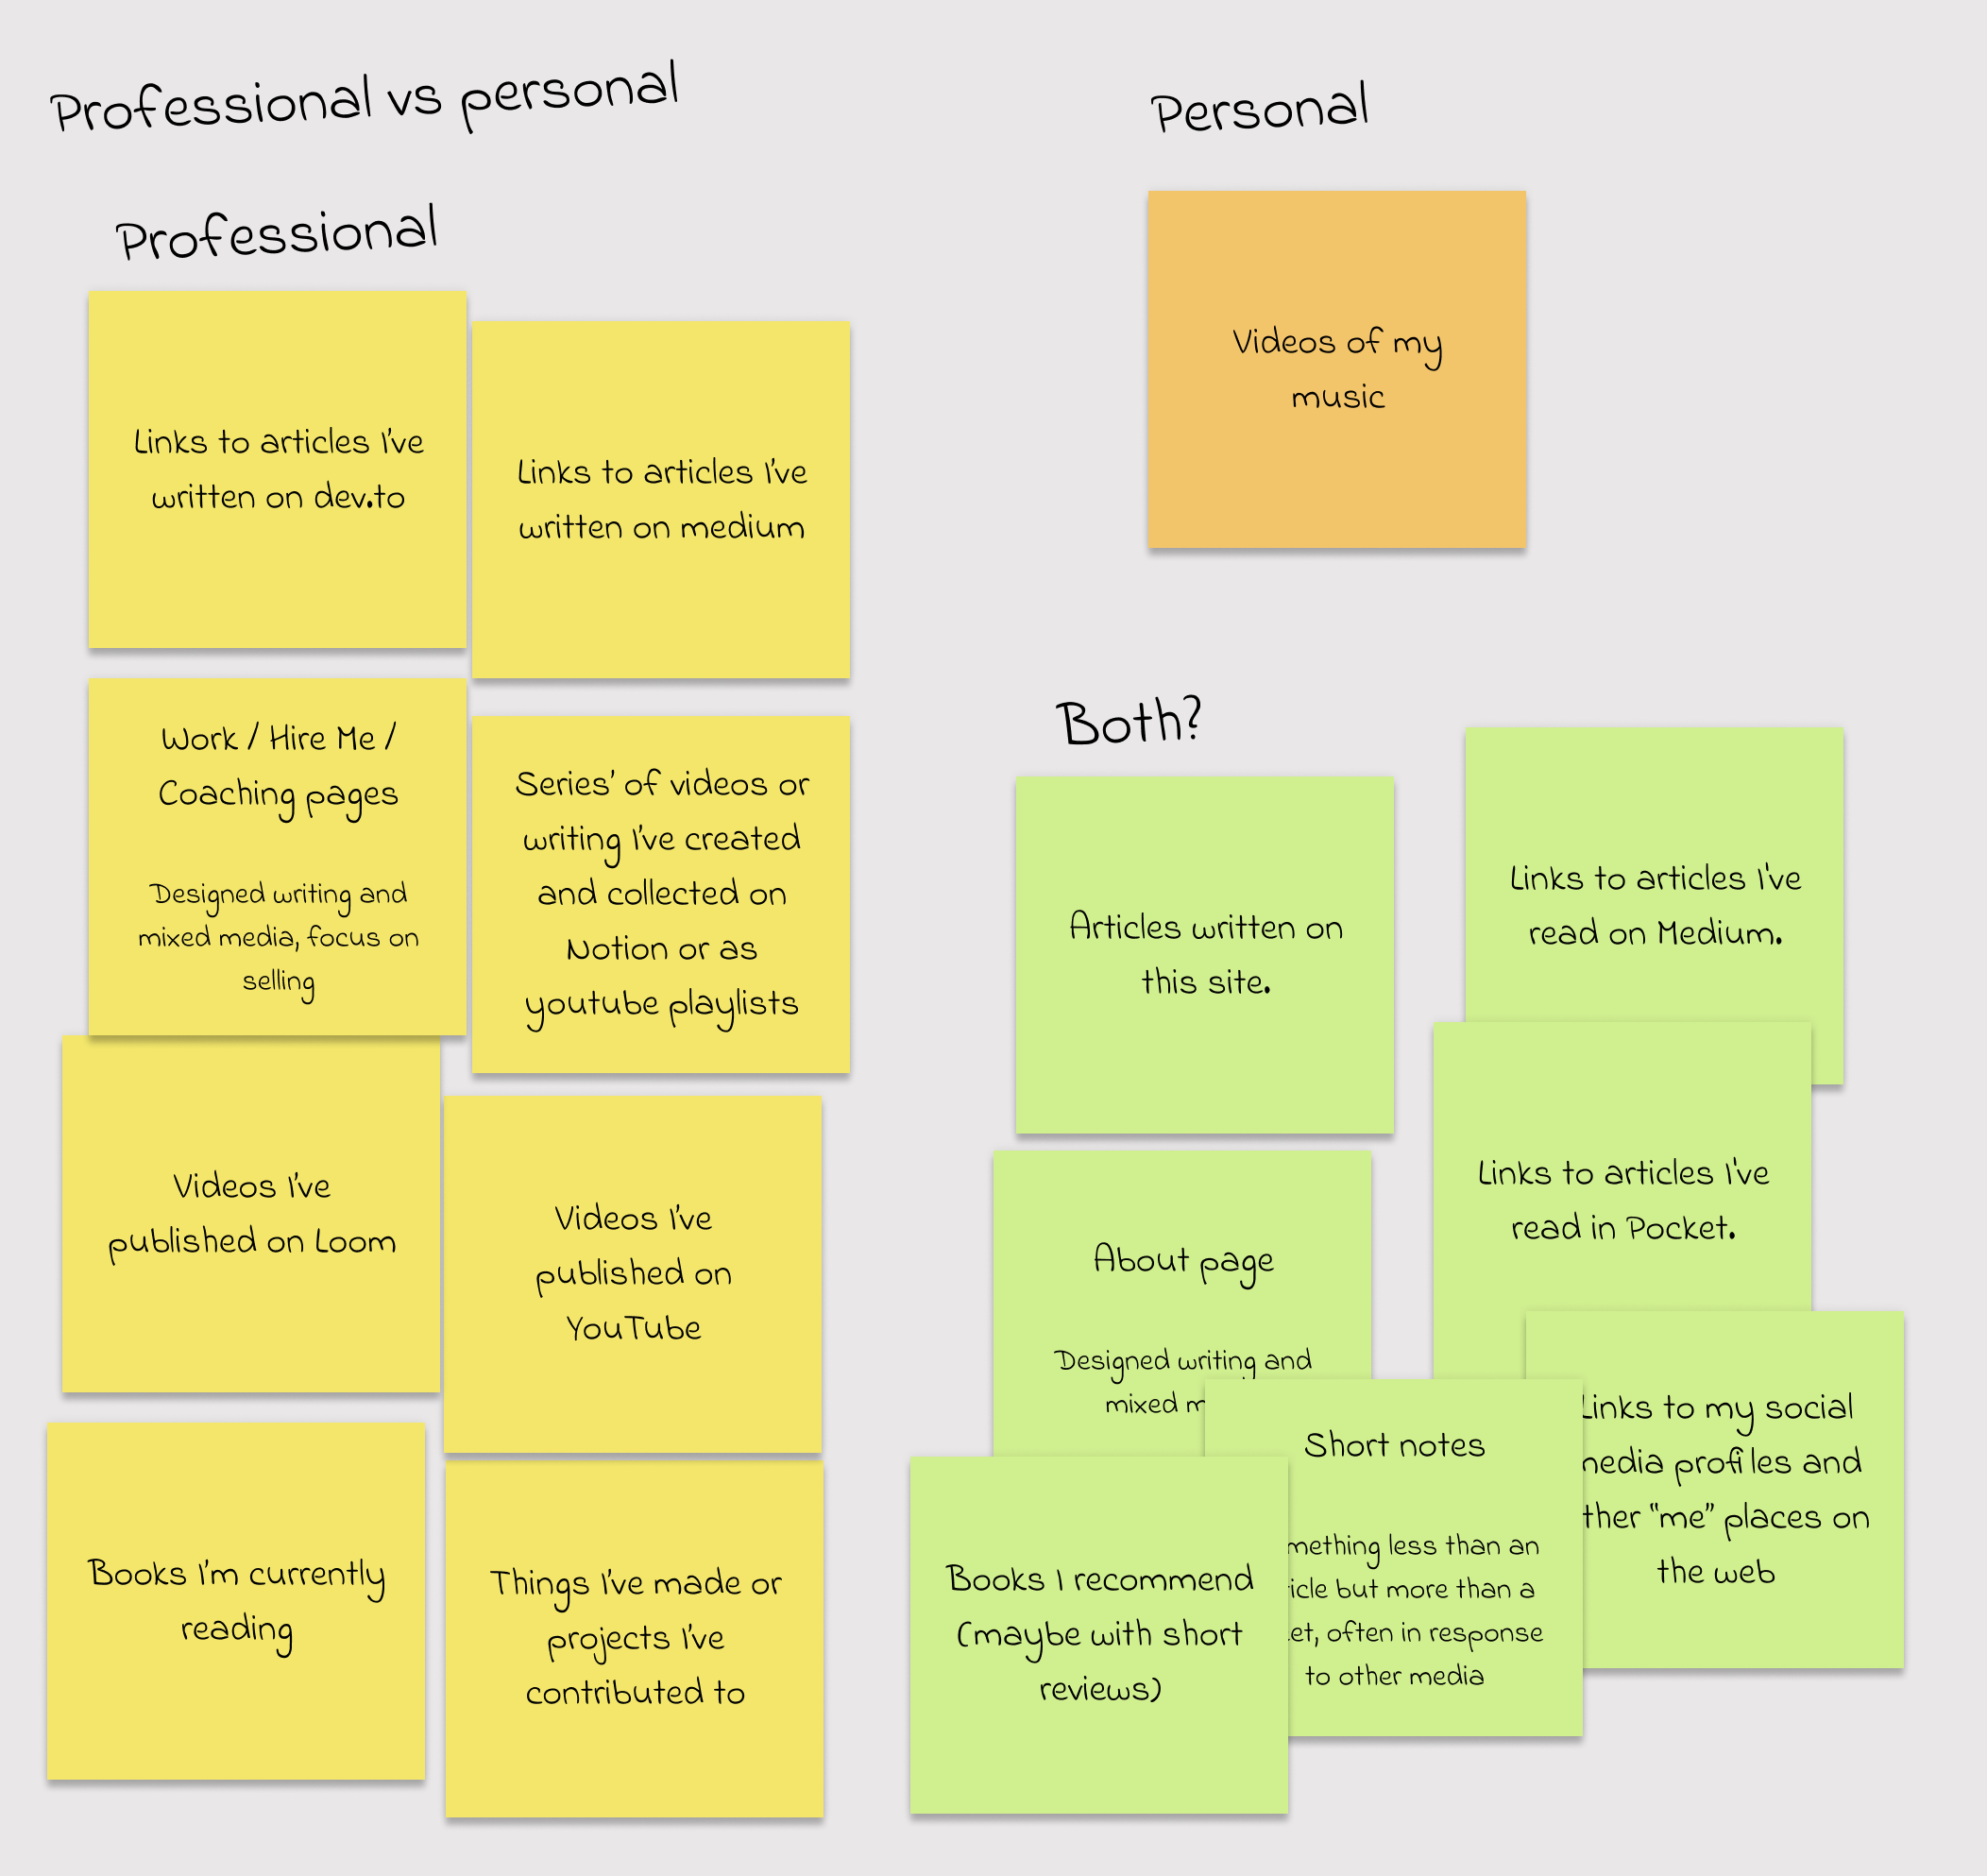 Post-it notes of content audit - by professional or personal